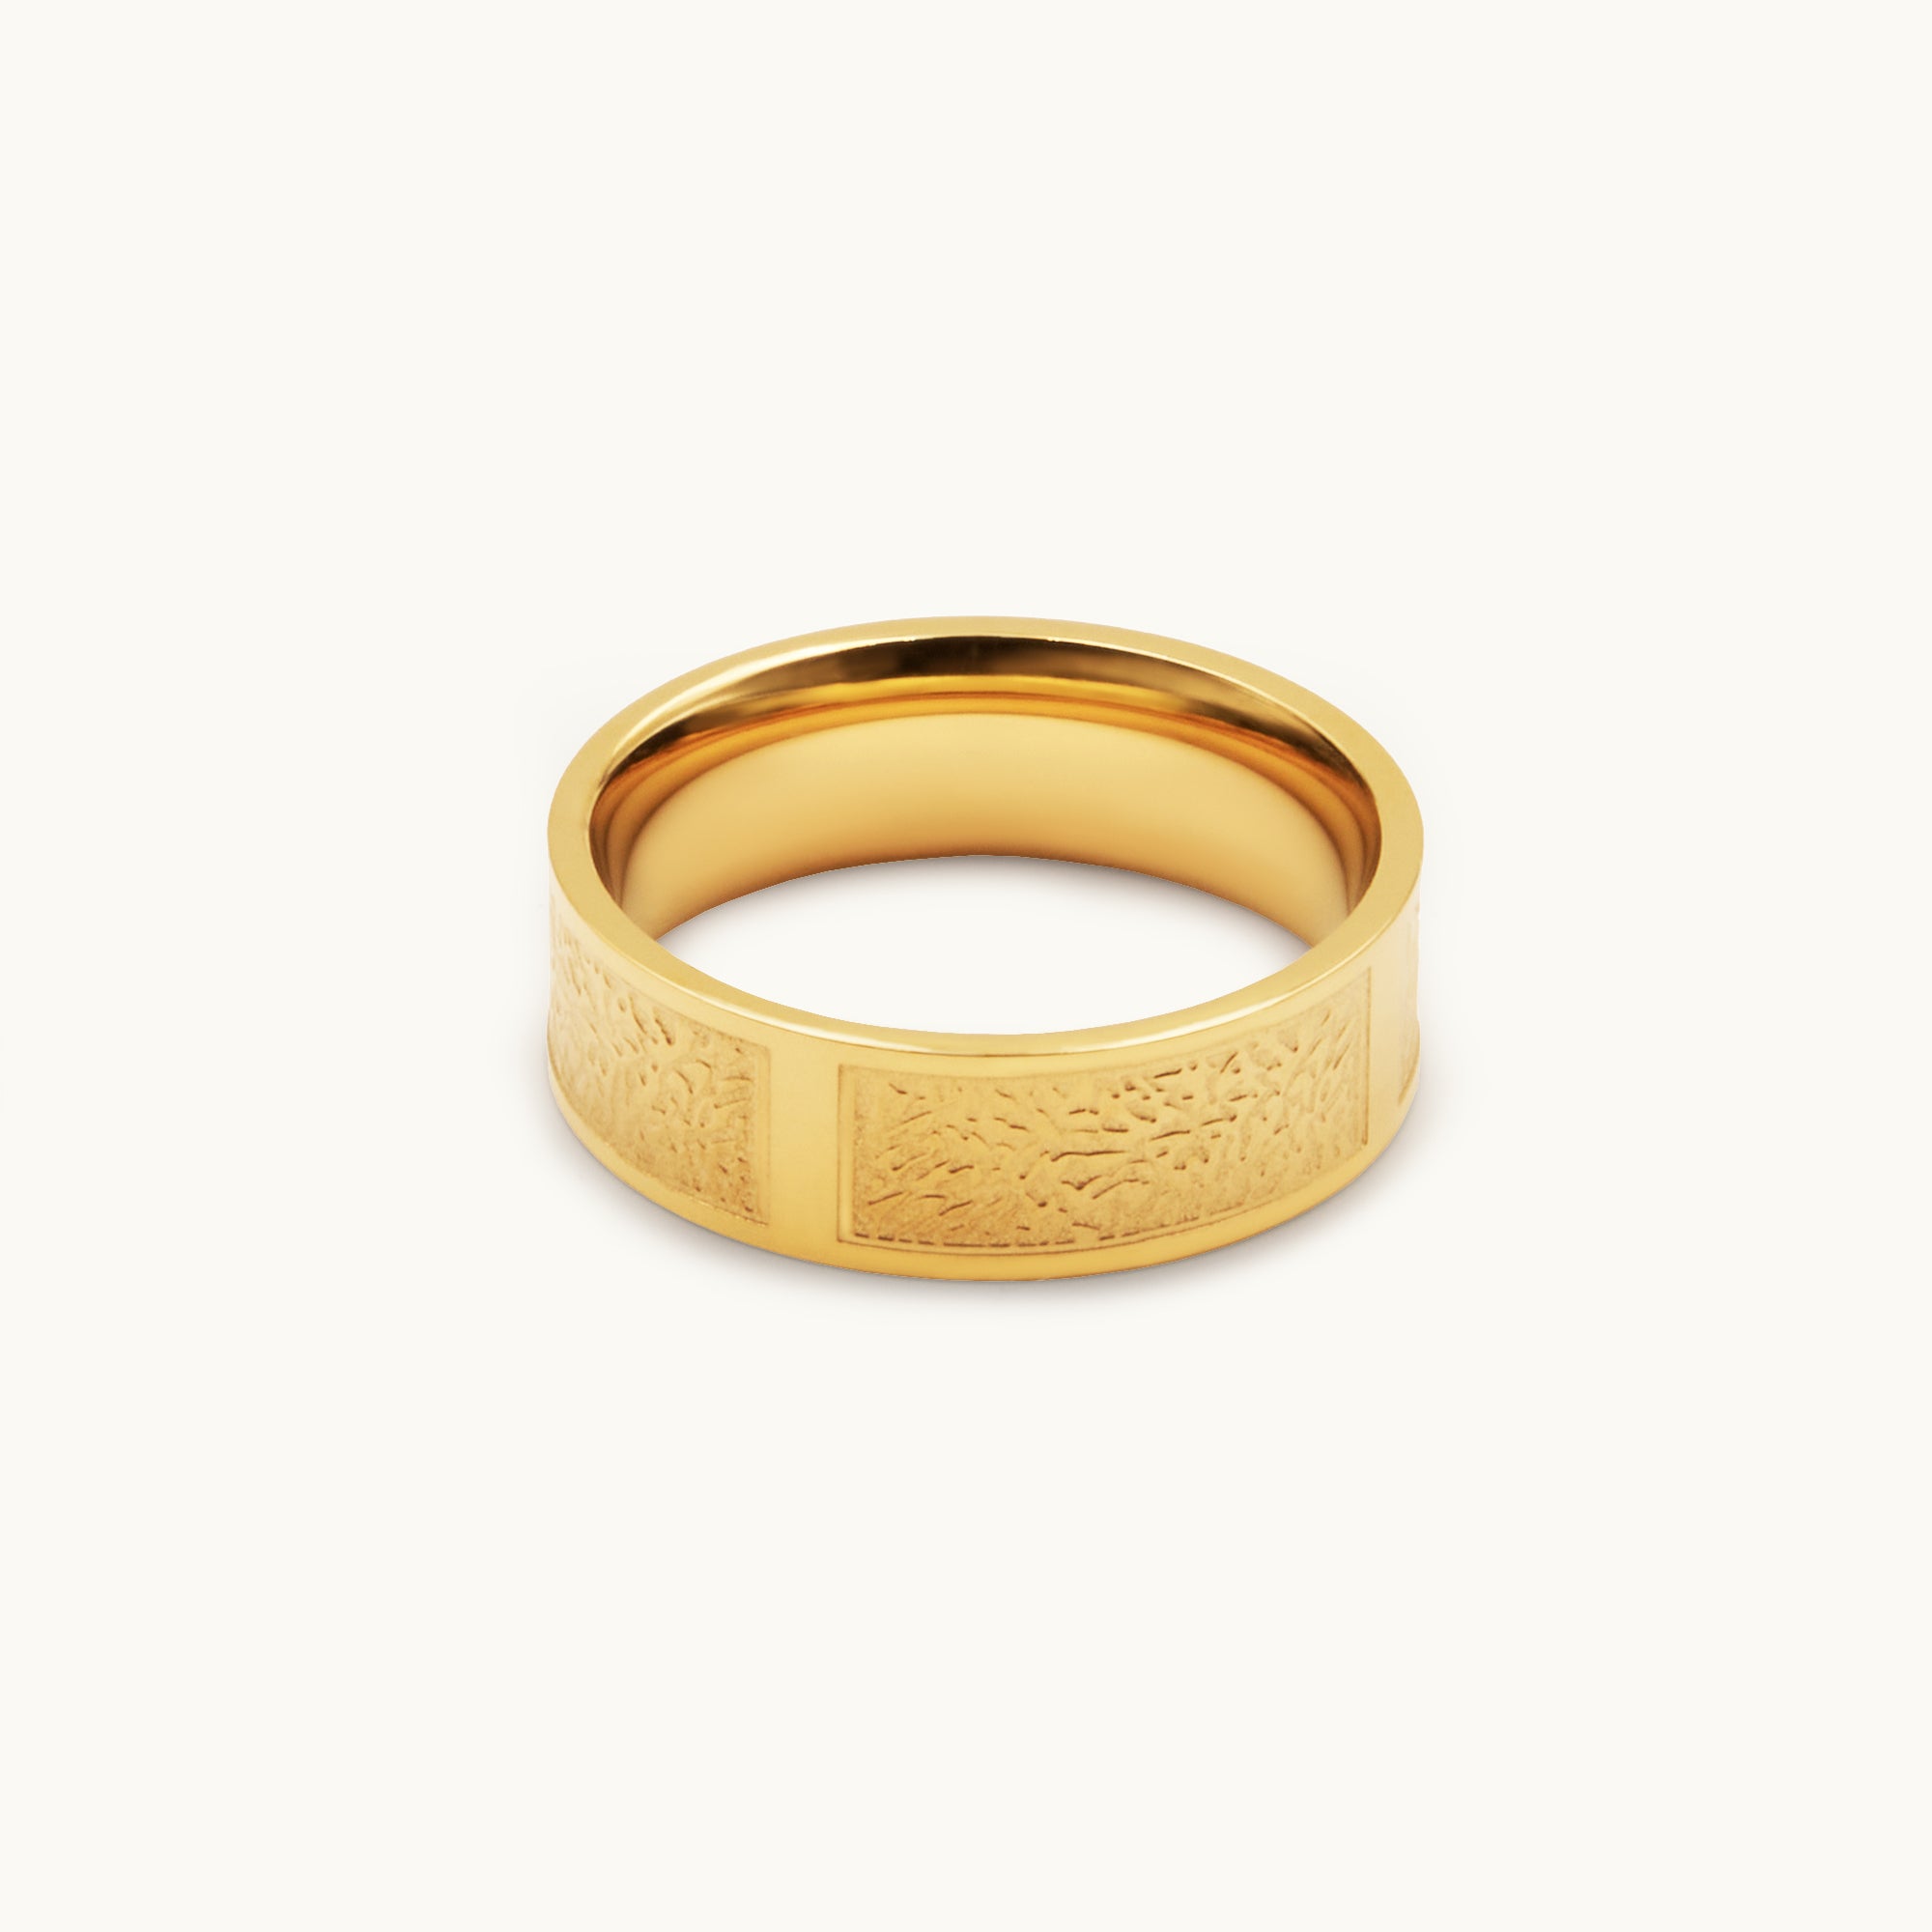 GOLD MATTE TEXTURE ENGRAVED RING